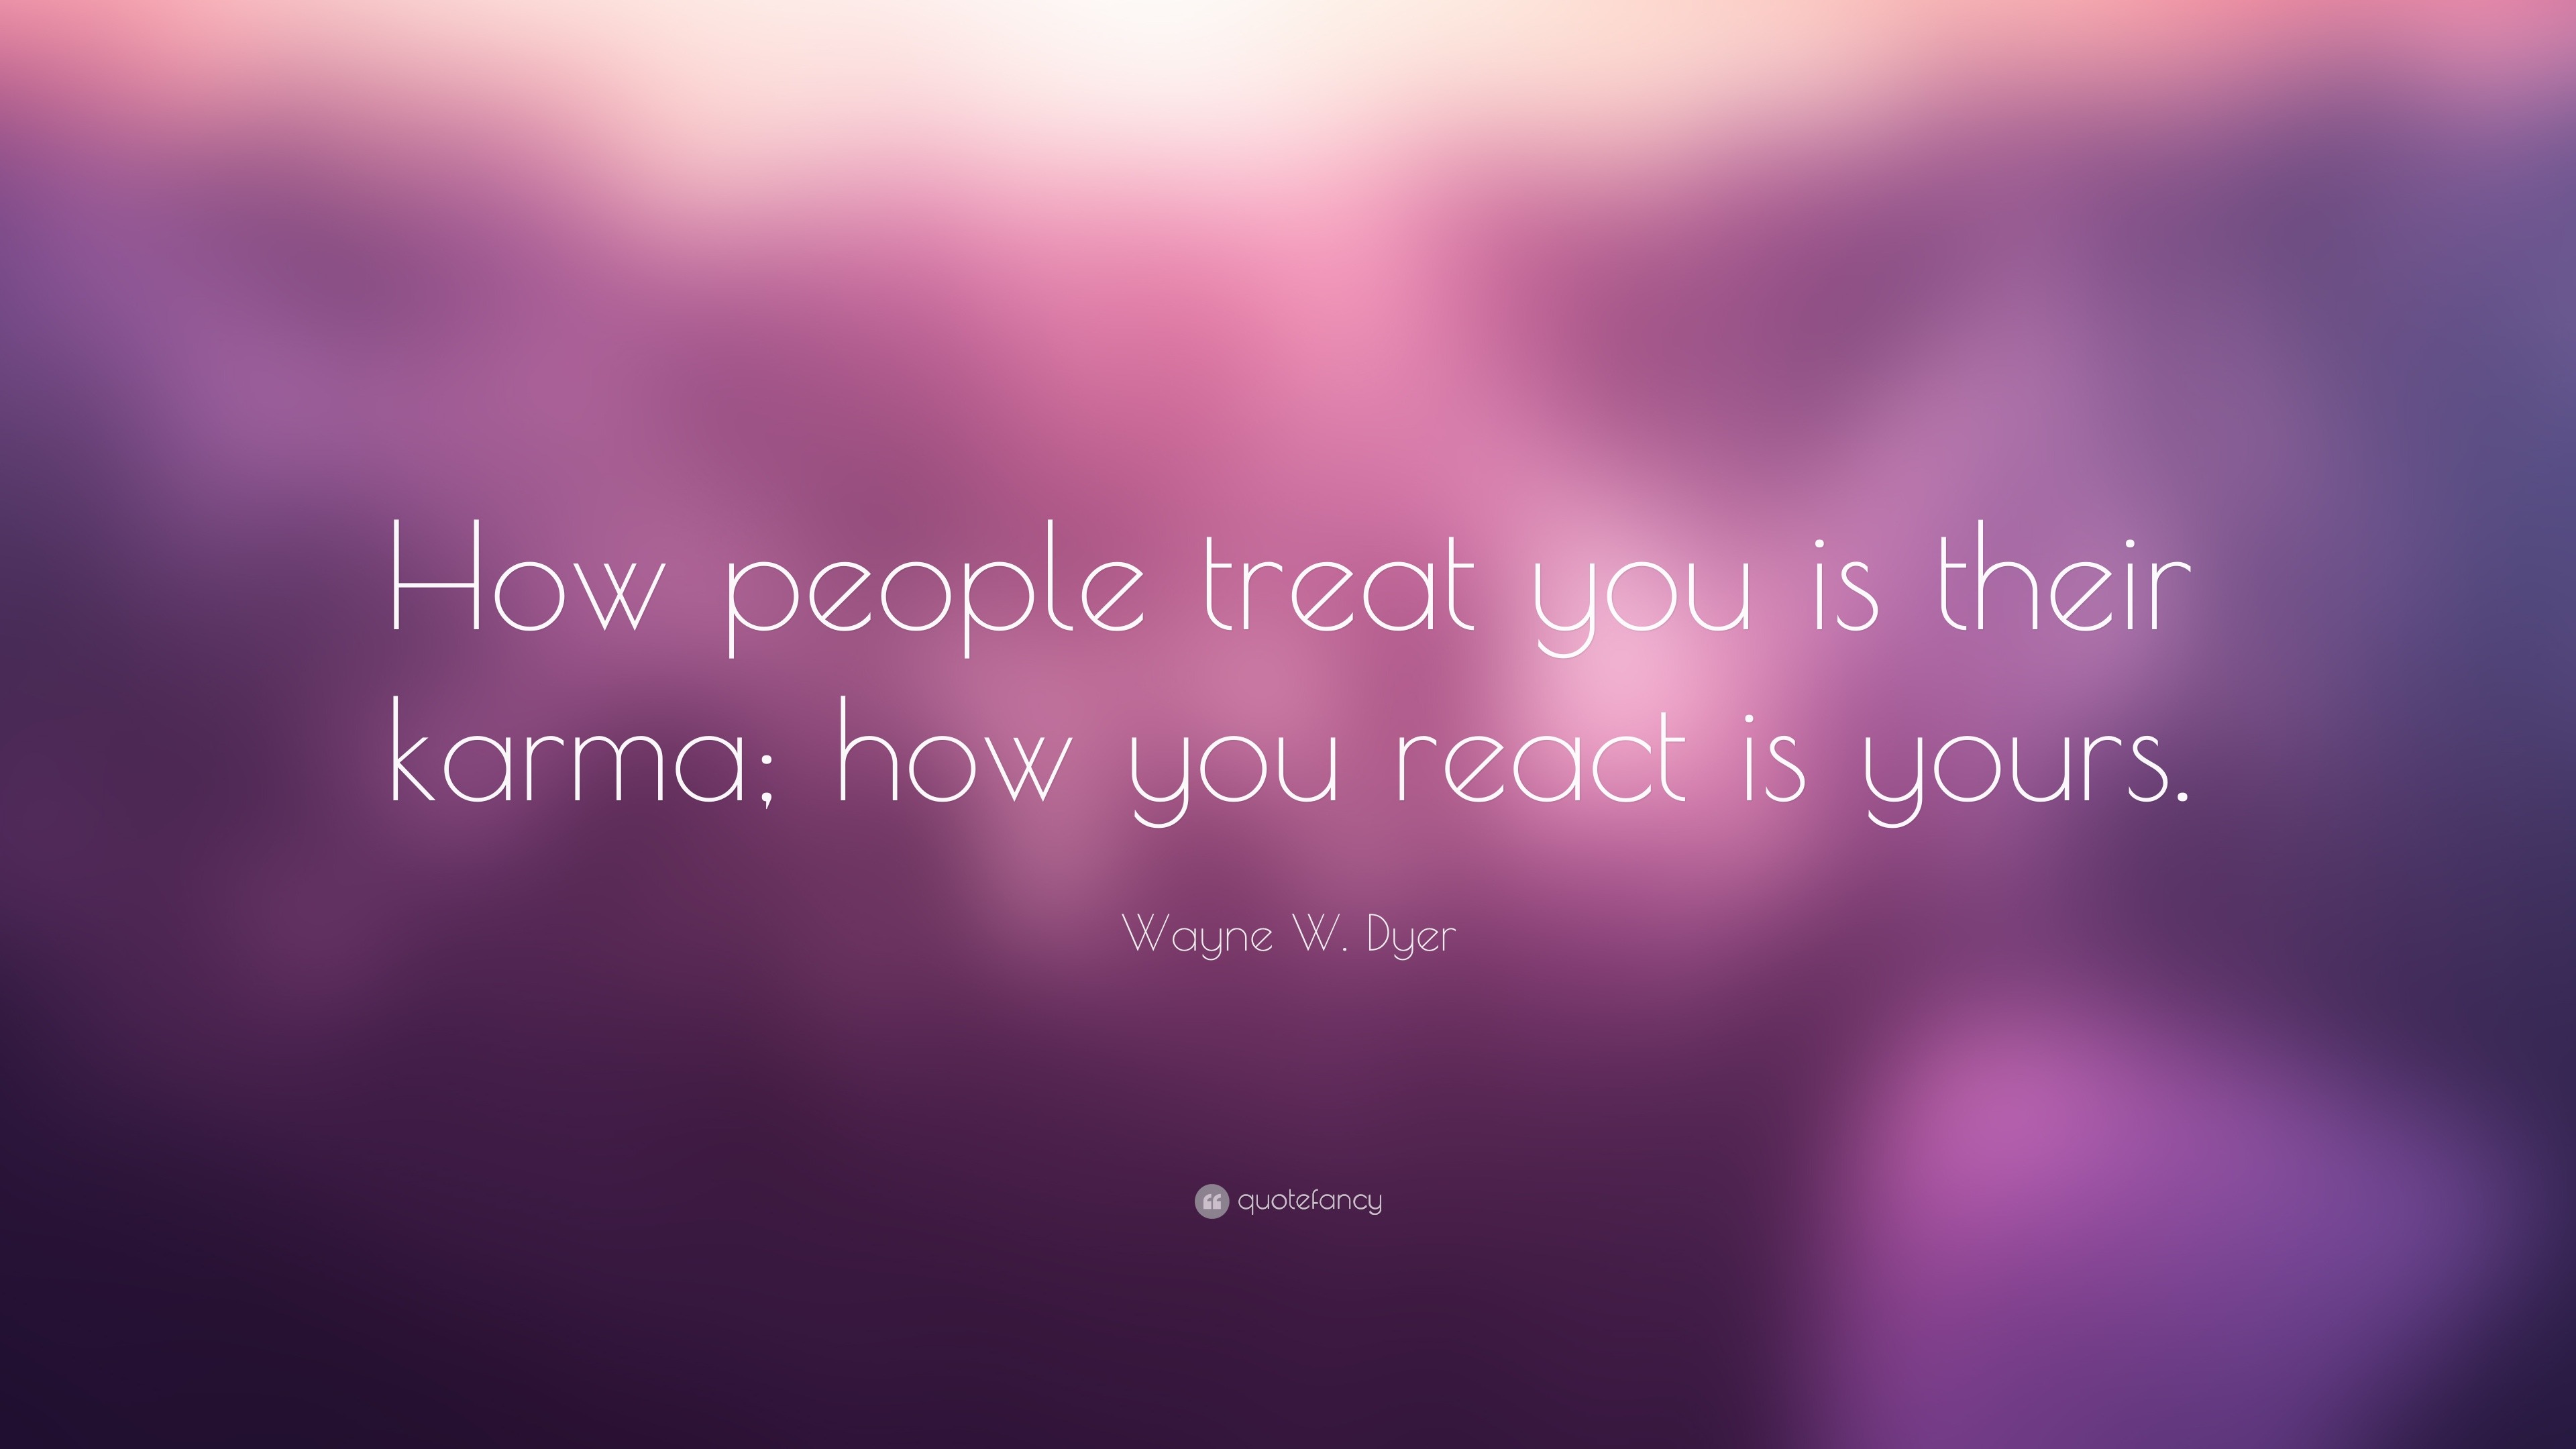 Wayne W. Dyer Quote: "How people treat you is their karma ...